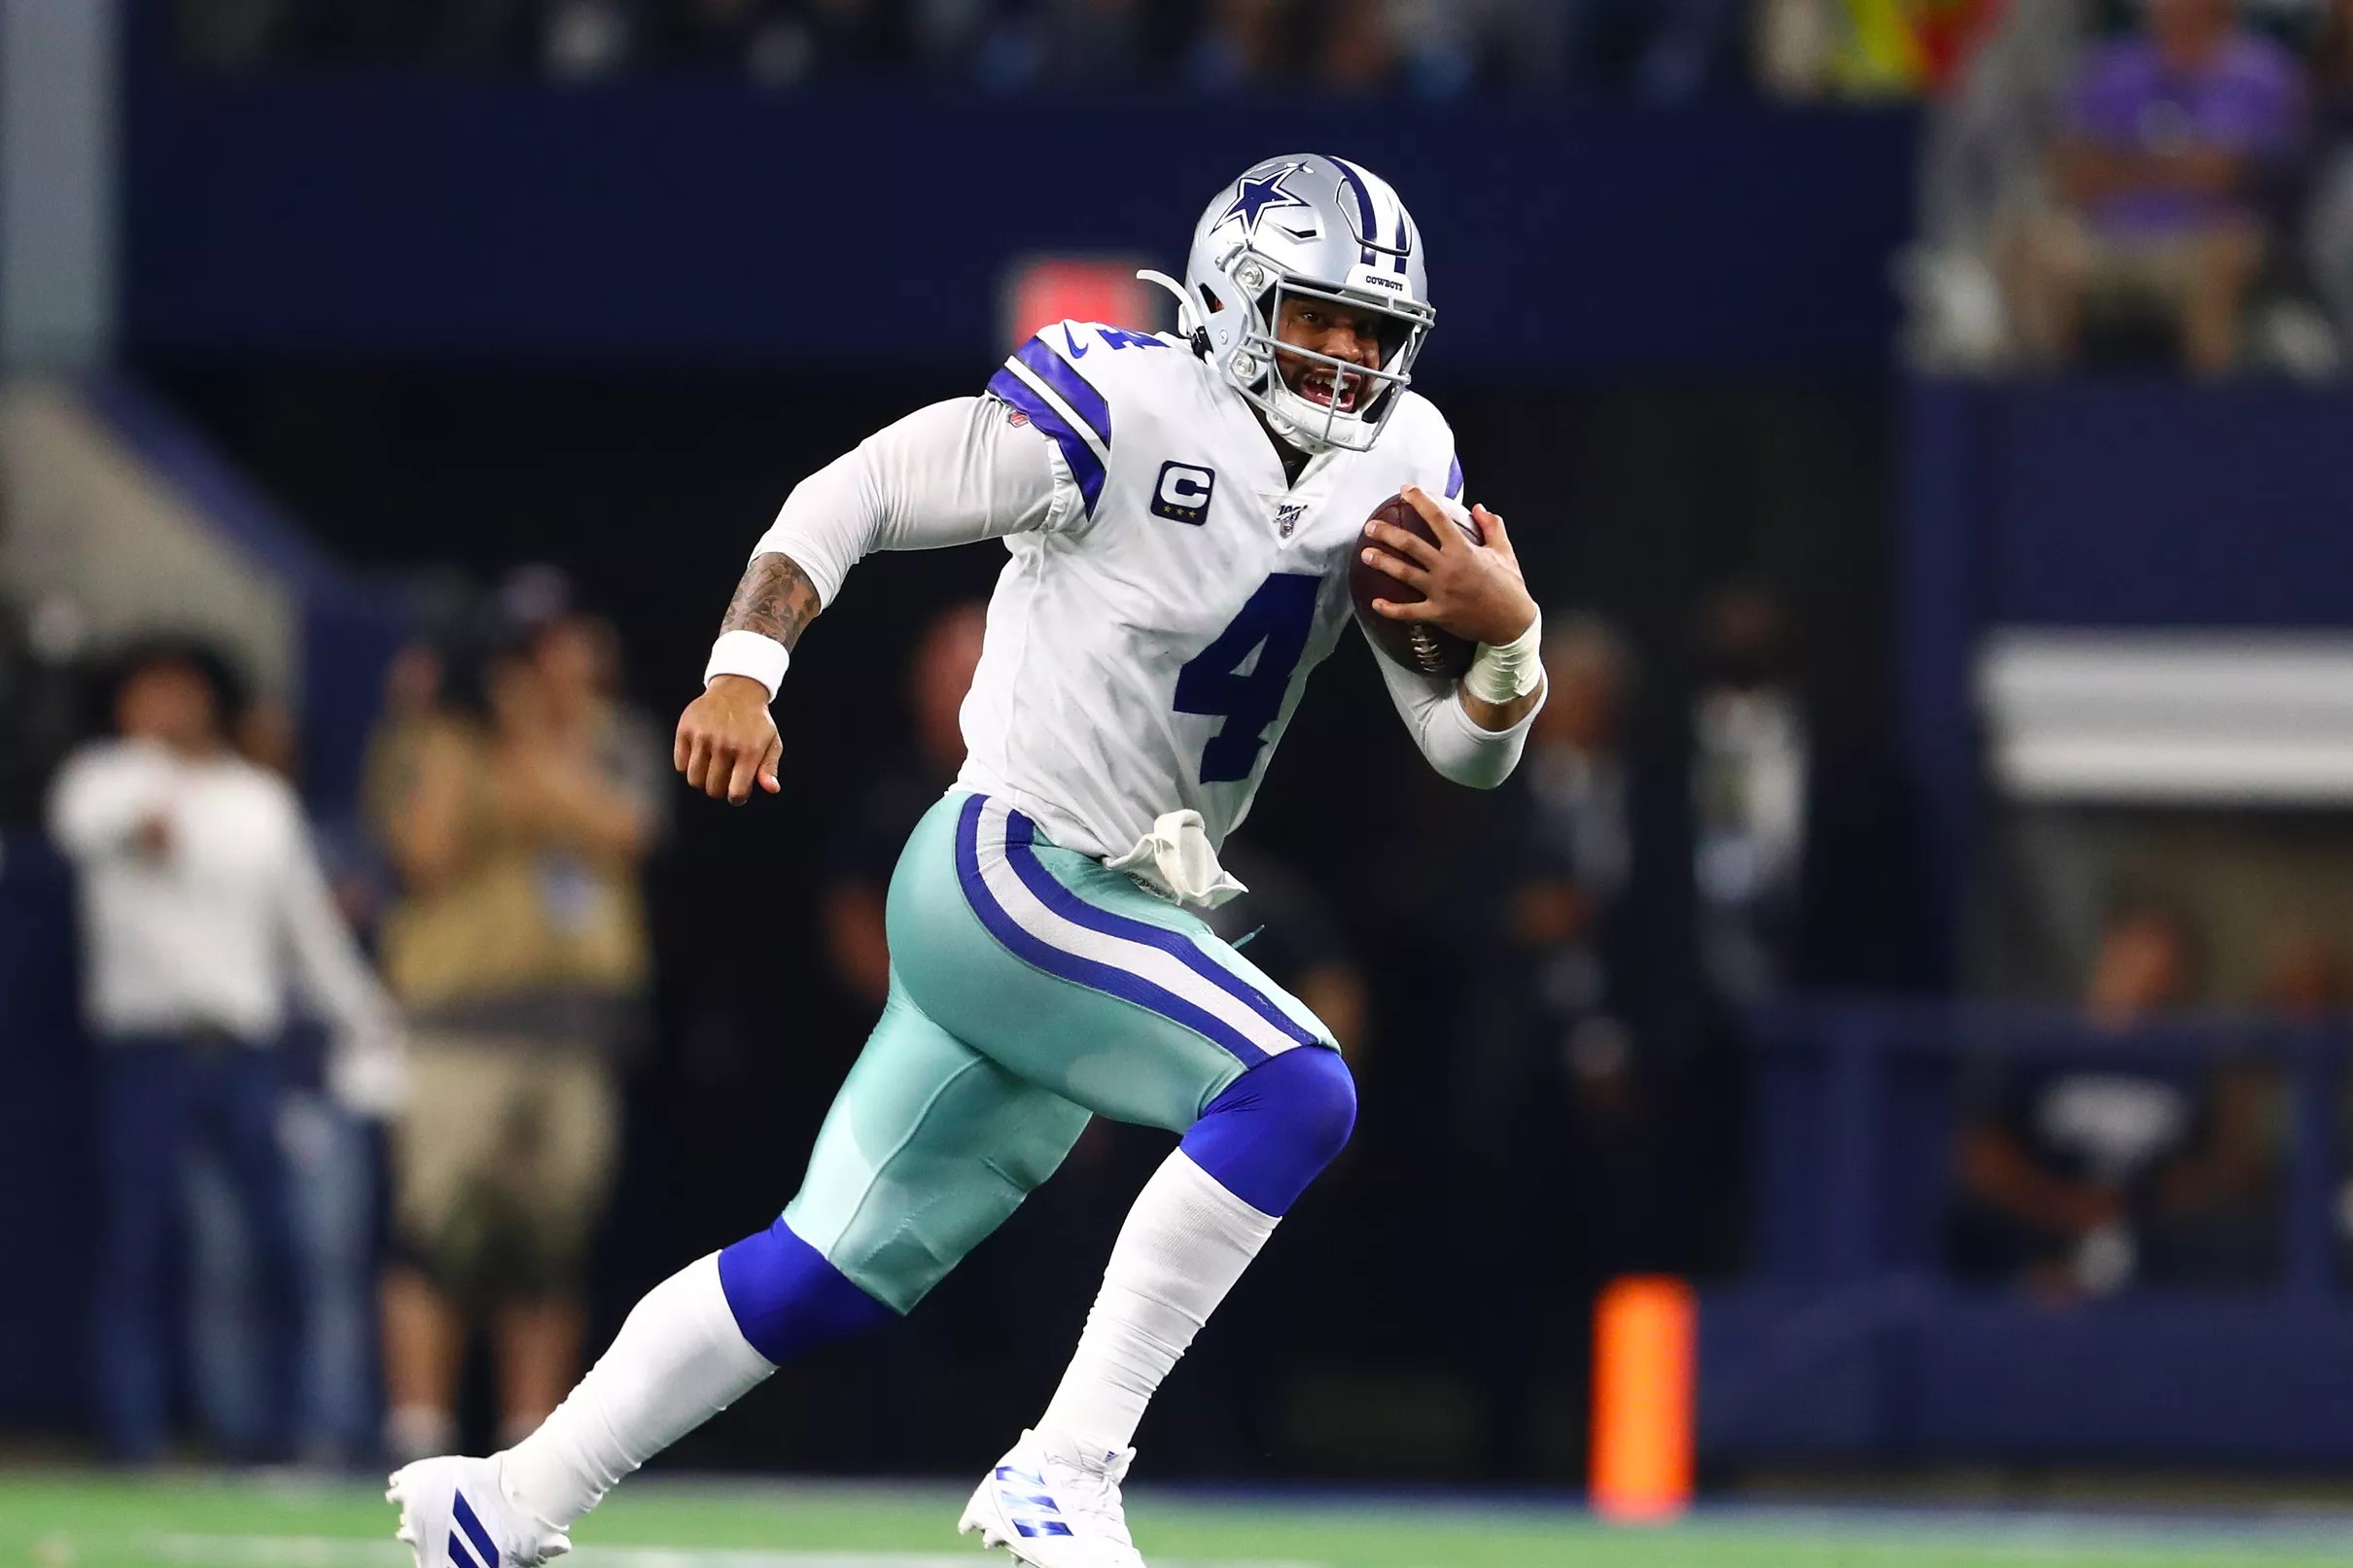 We now know what uniforms the Dallas Cowboys will wear for every game